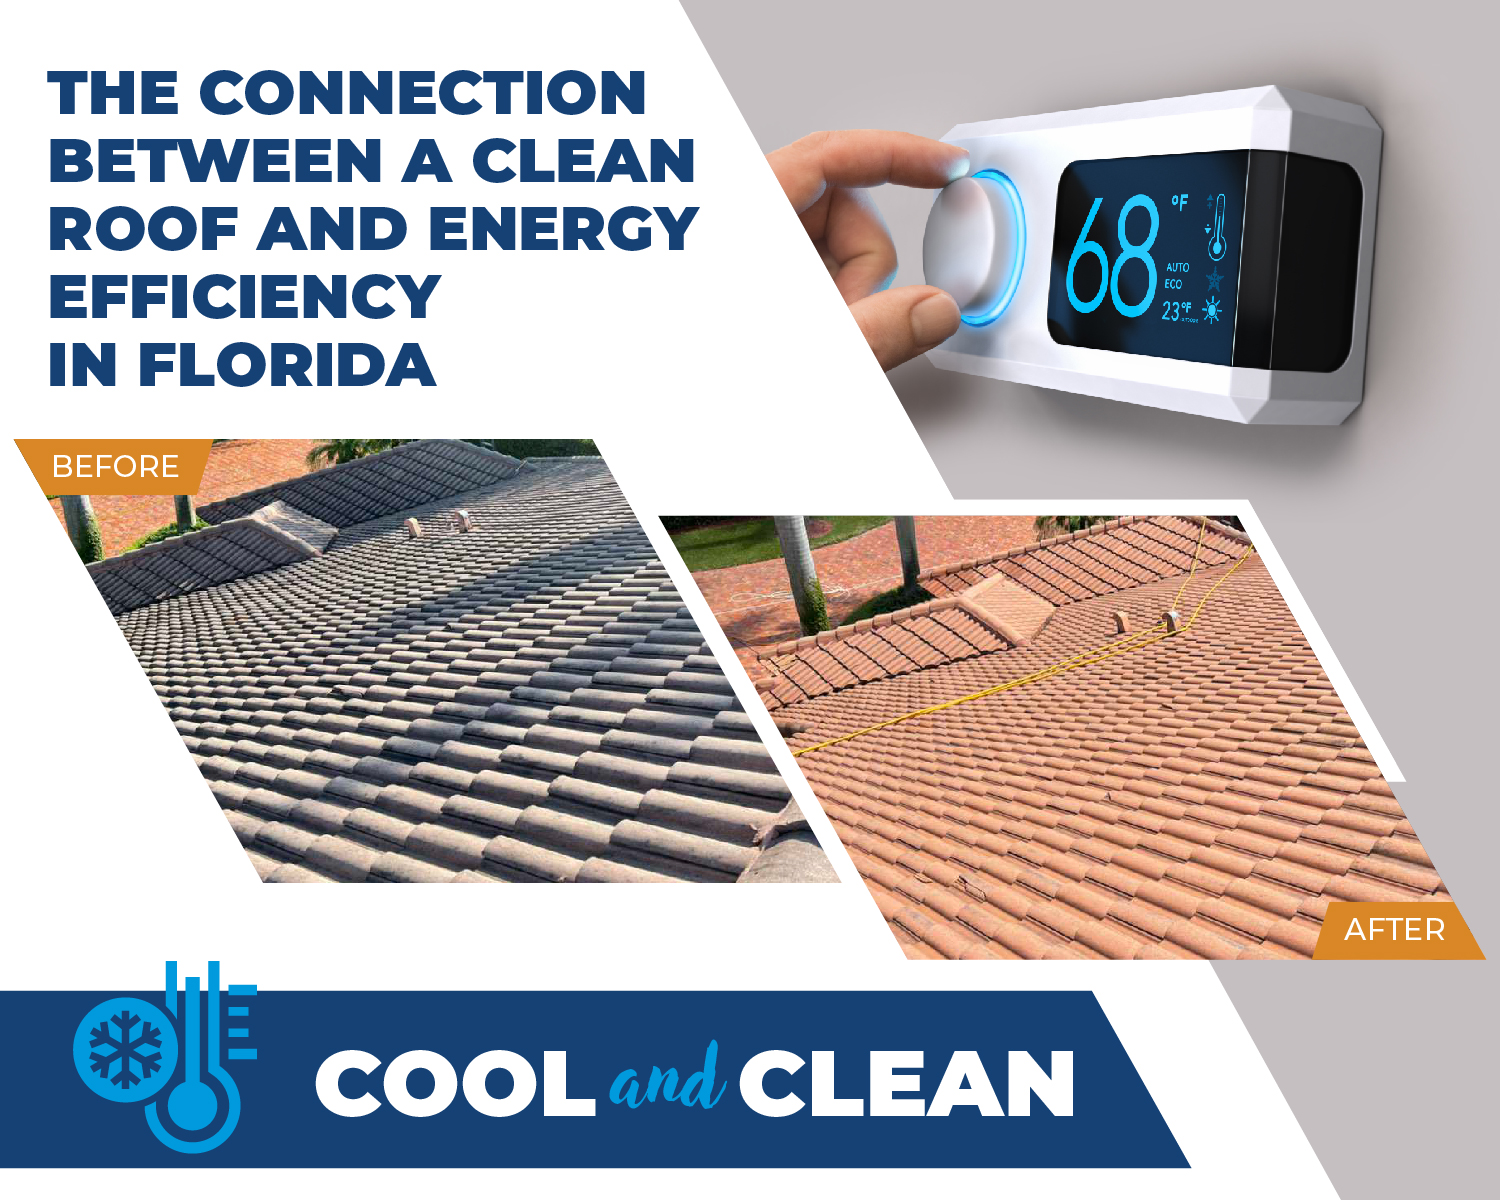 Cool and Clean: The Connection Between a Clean Roof and Energy Efficiency in Florida